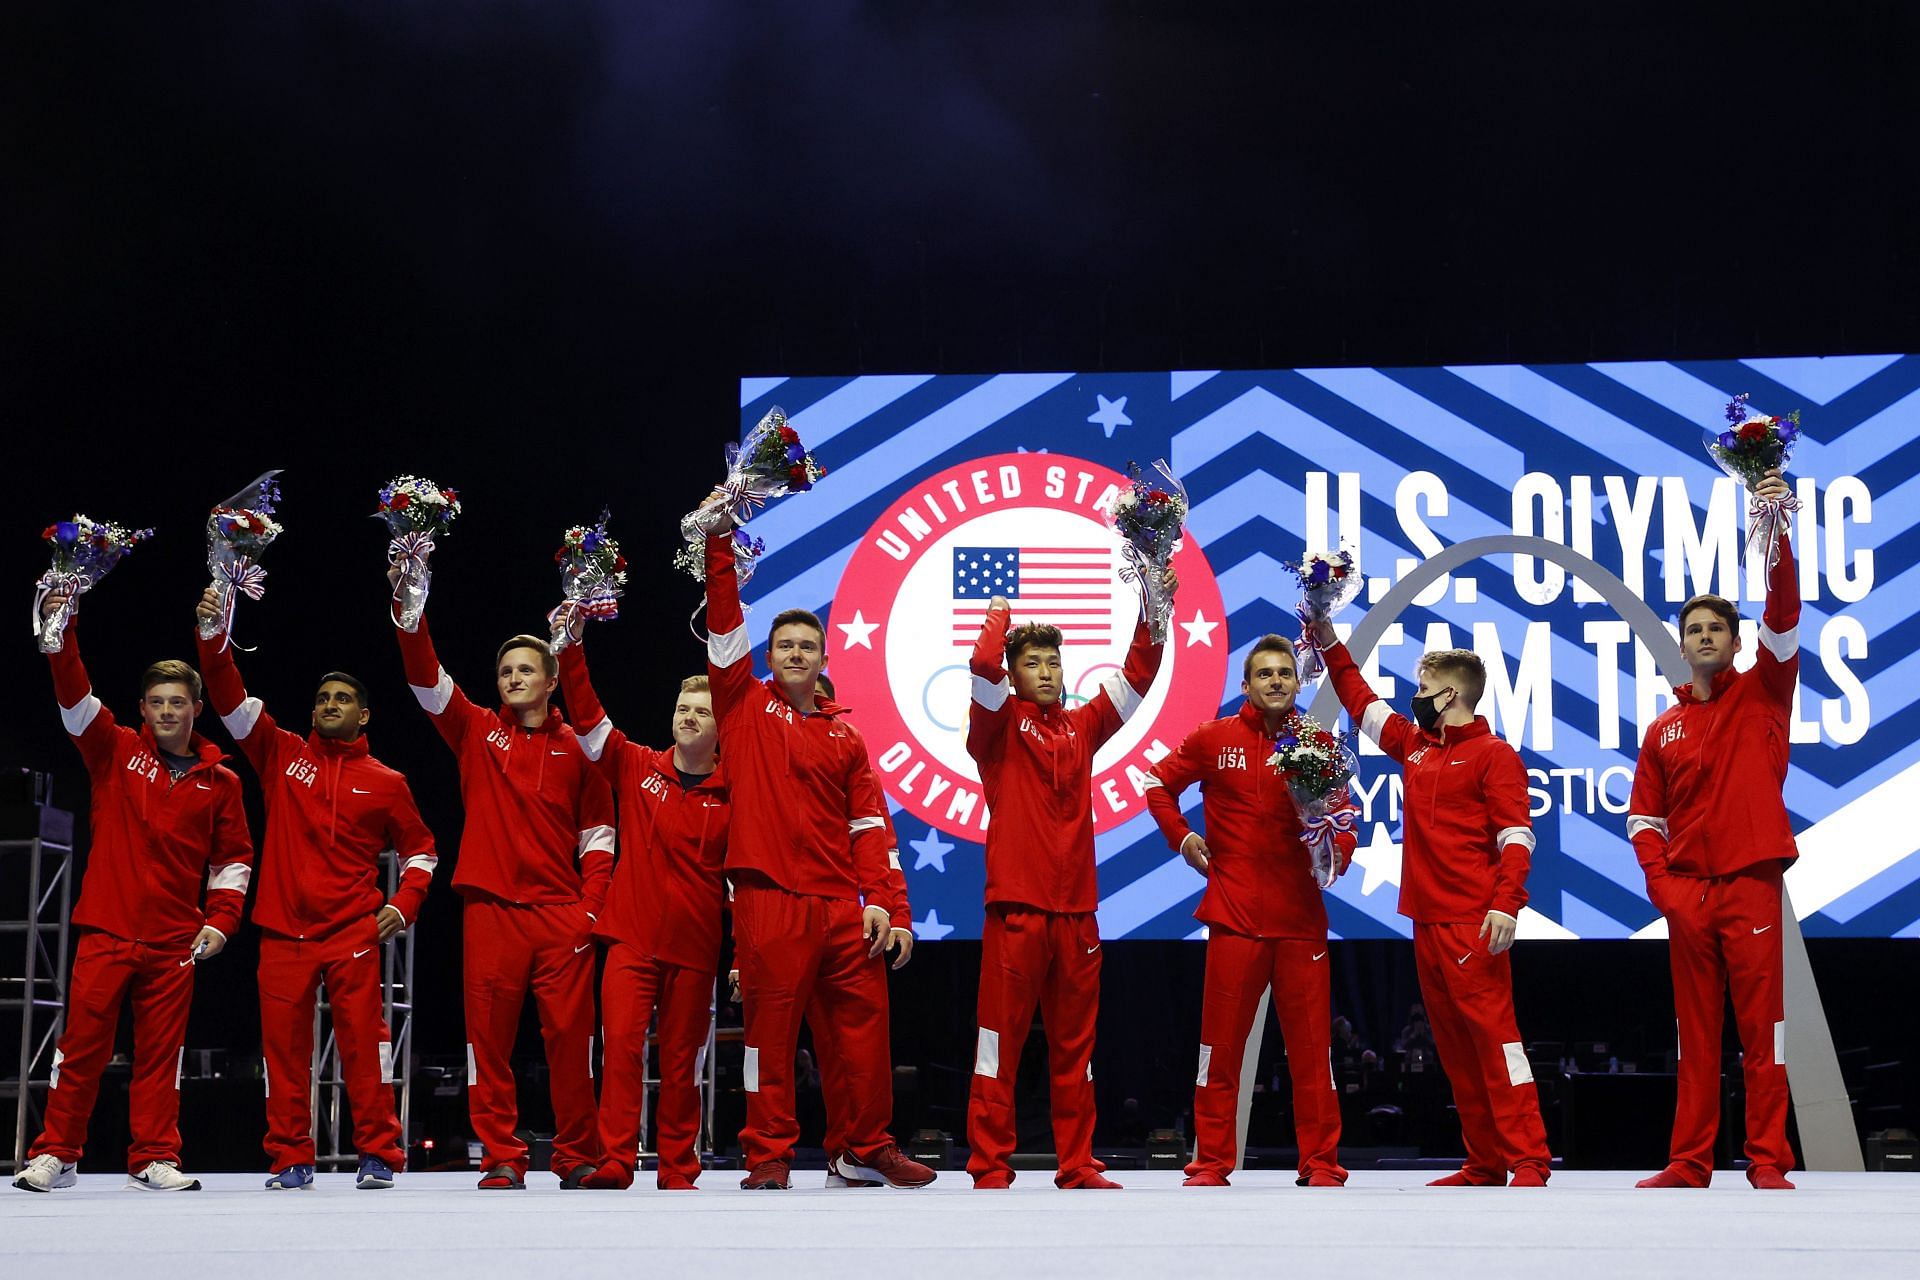 Alex Diab, Akash Modi, Allen Bower, Cameron Bock, Brandon Briones, Brody Malone, Yul Moldauer, Sam Mikulak, Shane Wiskus, and Alec Yoder pose after being selected to the 2021 U.S. Olympic Gymnastic team after the Men's competition of the 2021 U.S. Gymnastic Olympic Trials at America’s Center on June 26, 2021 in St Louis, Missouri. (Photo by Jamie Squire/Getty Images)